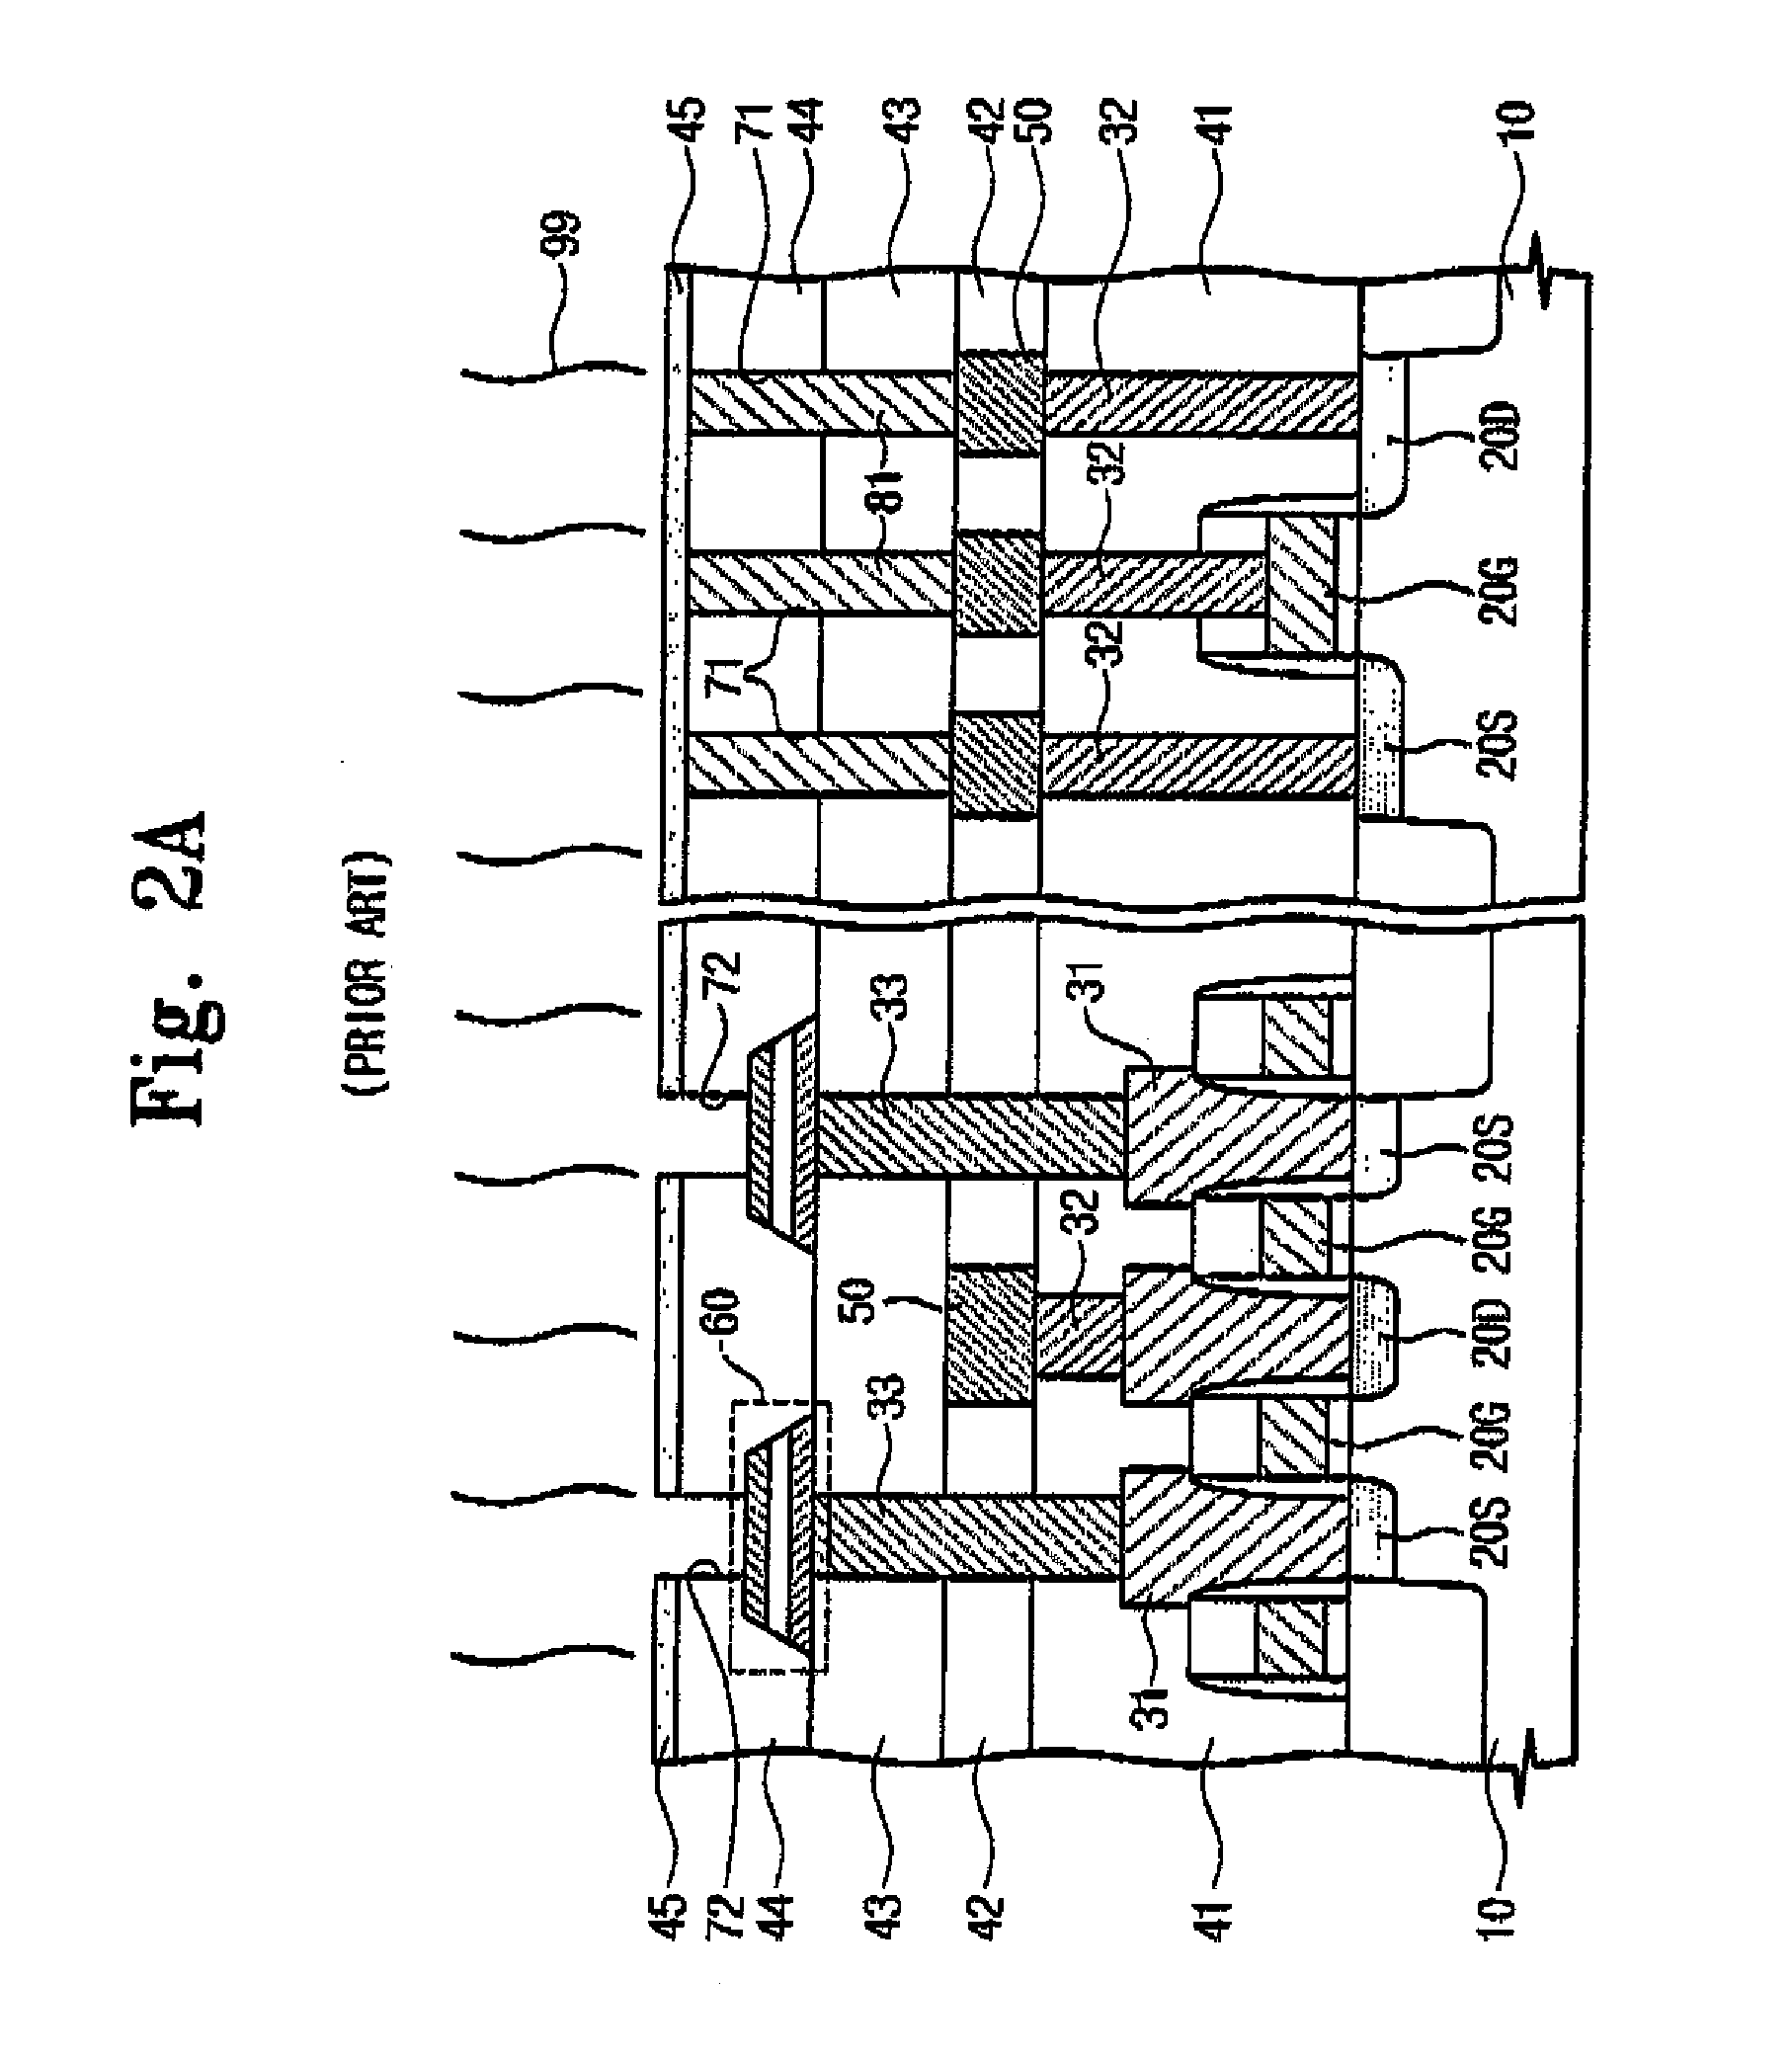 Ferroelectric random access memory and methods of fabricating the same